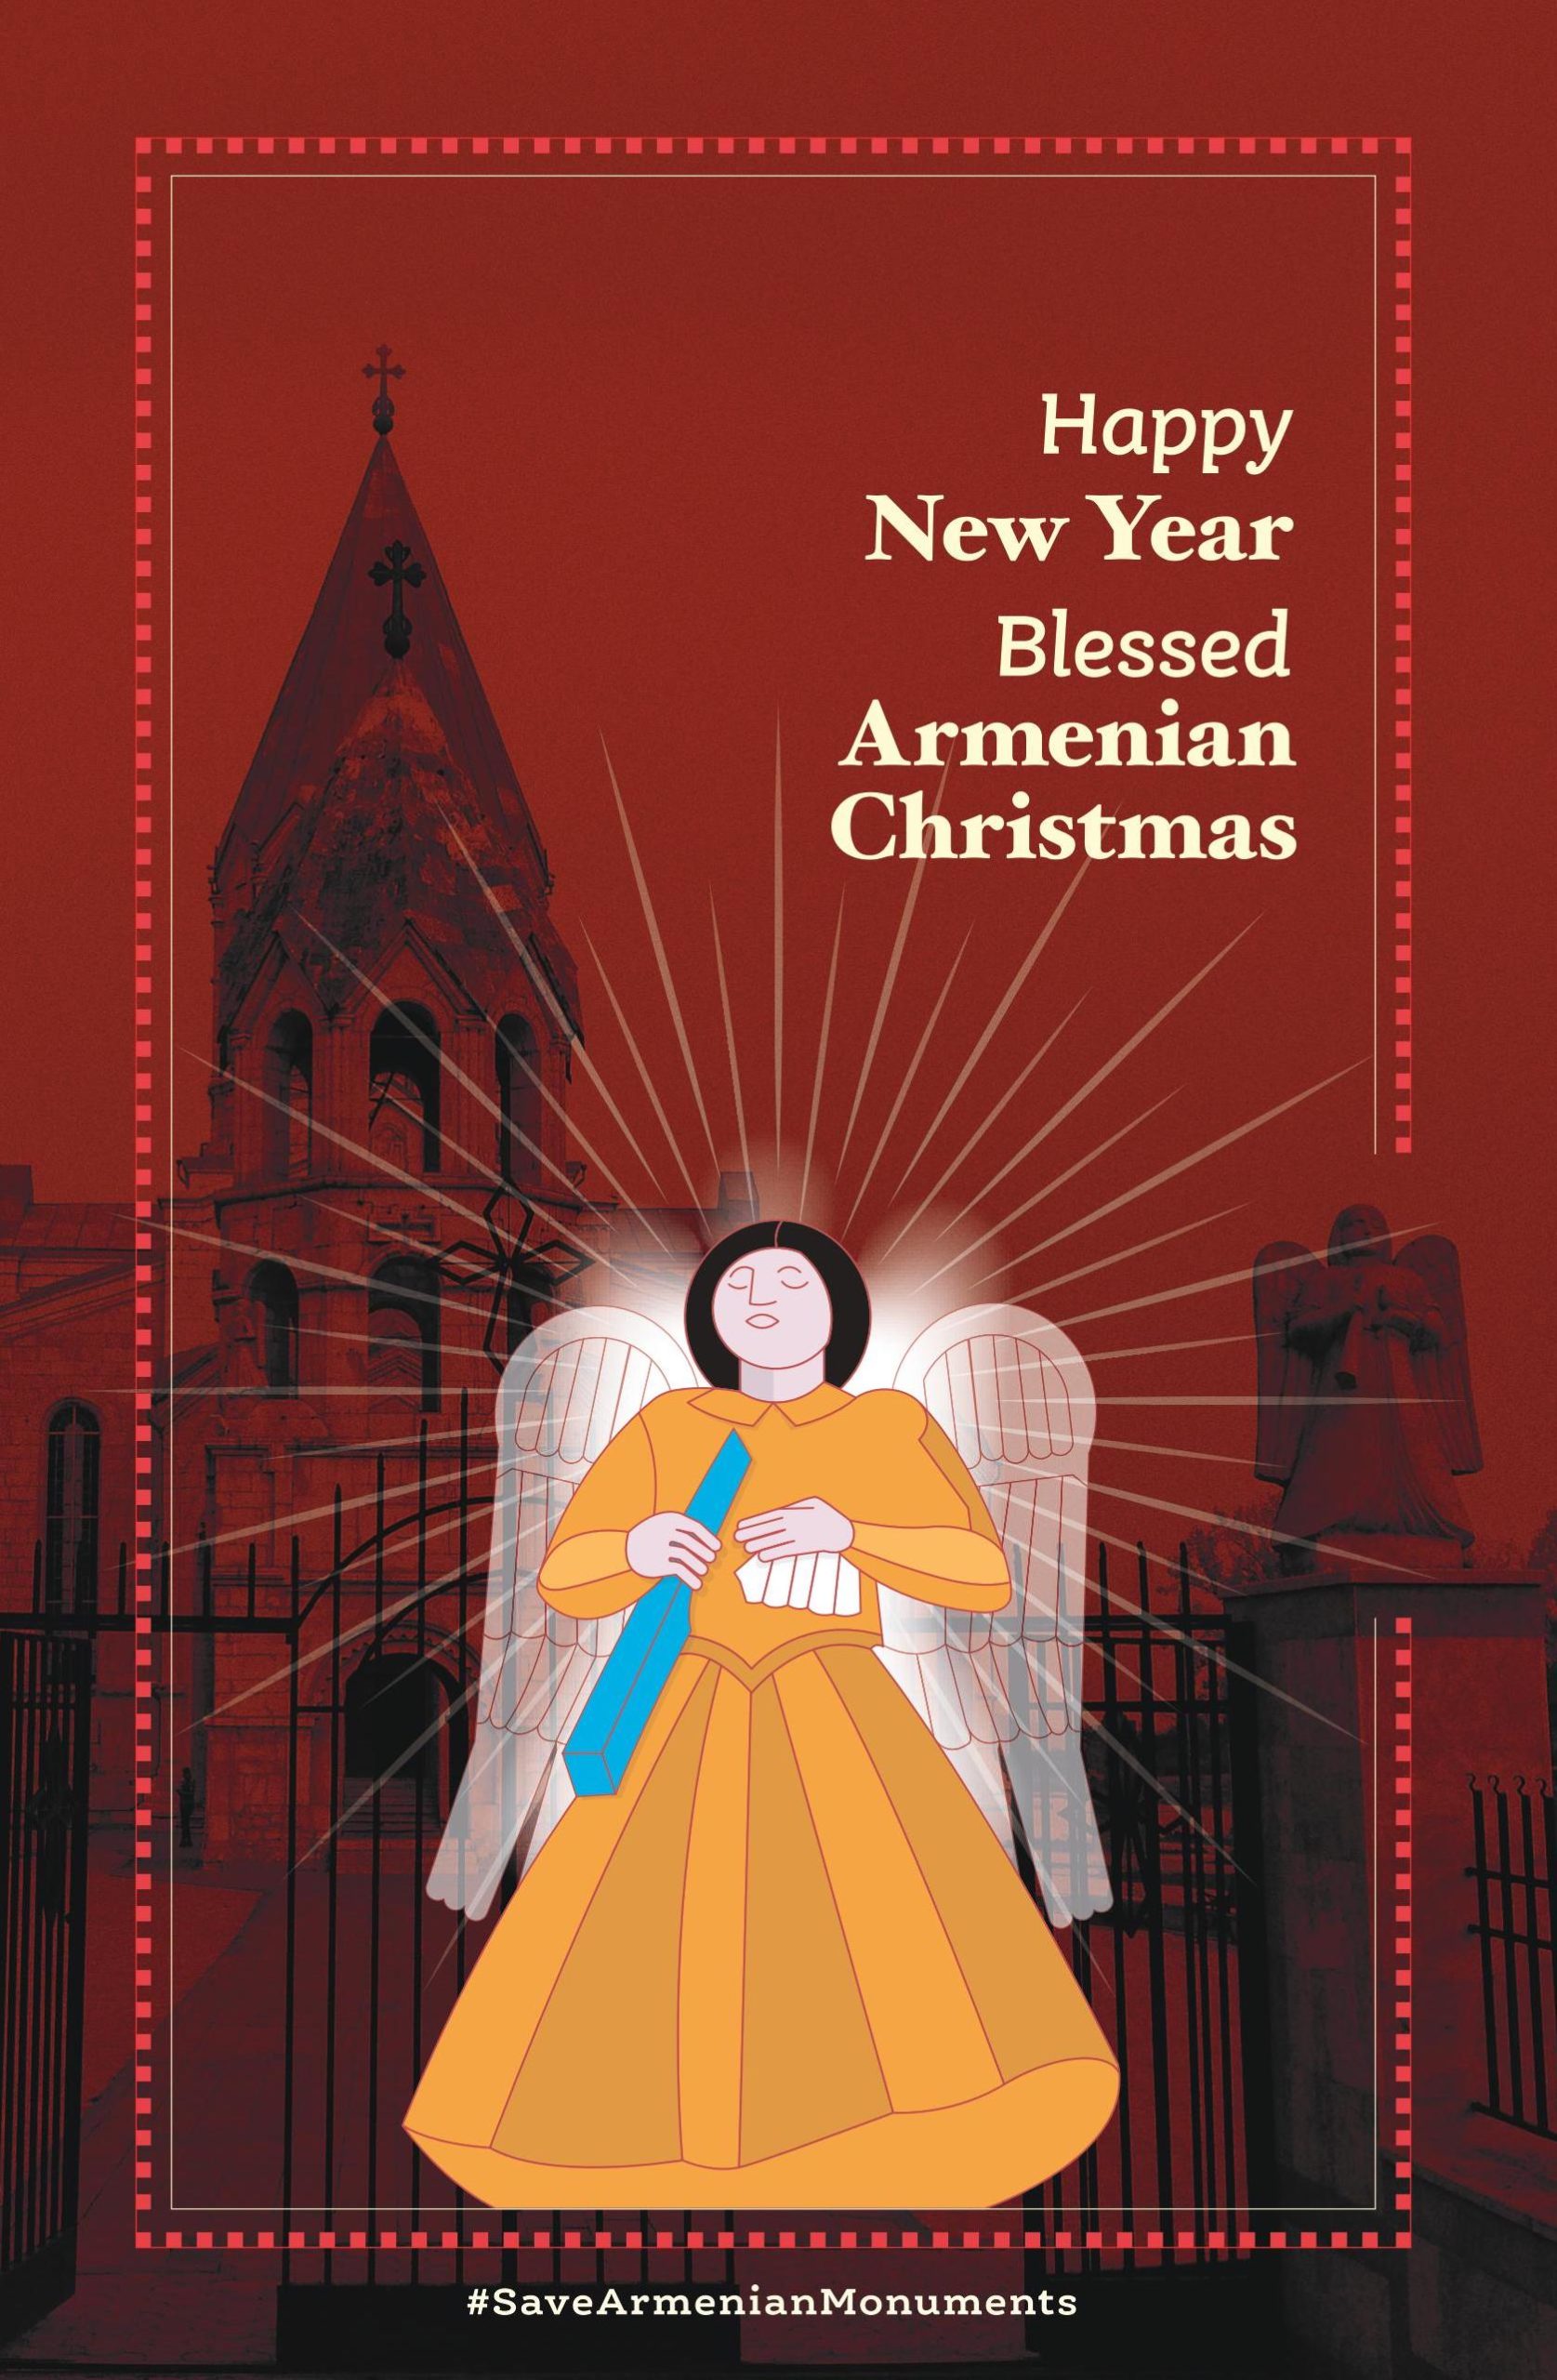 Happy 2022 and Blessed Armenian Christmas from Save Armenian Monuments